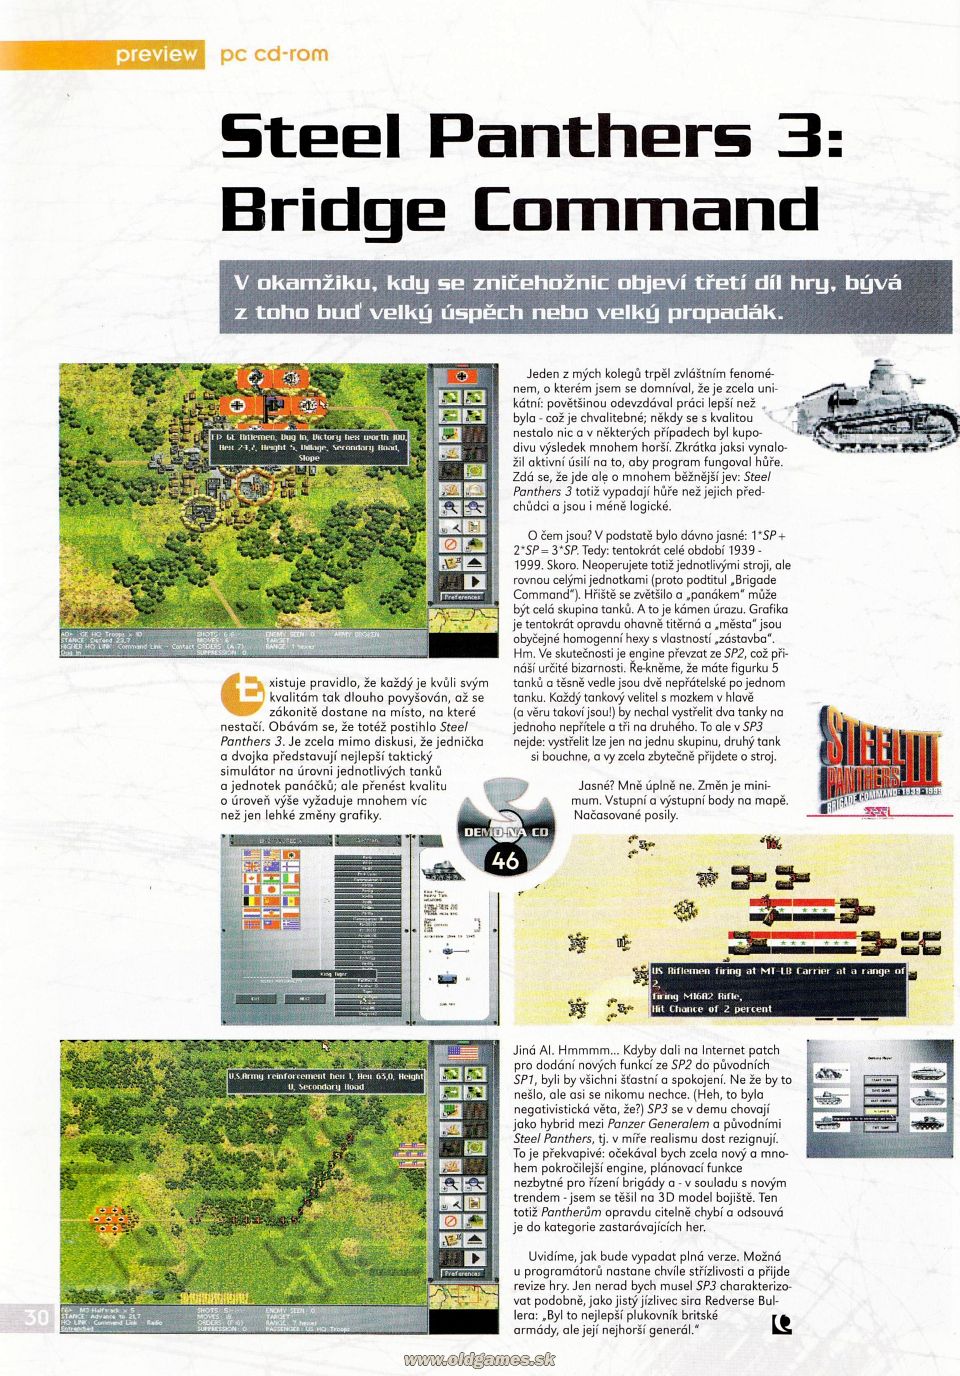 Preview: Steel Panthers 3: Bridge Command